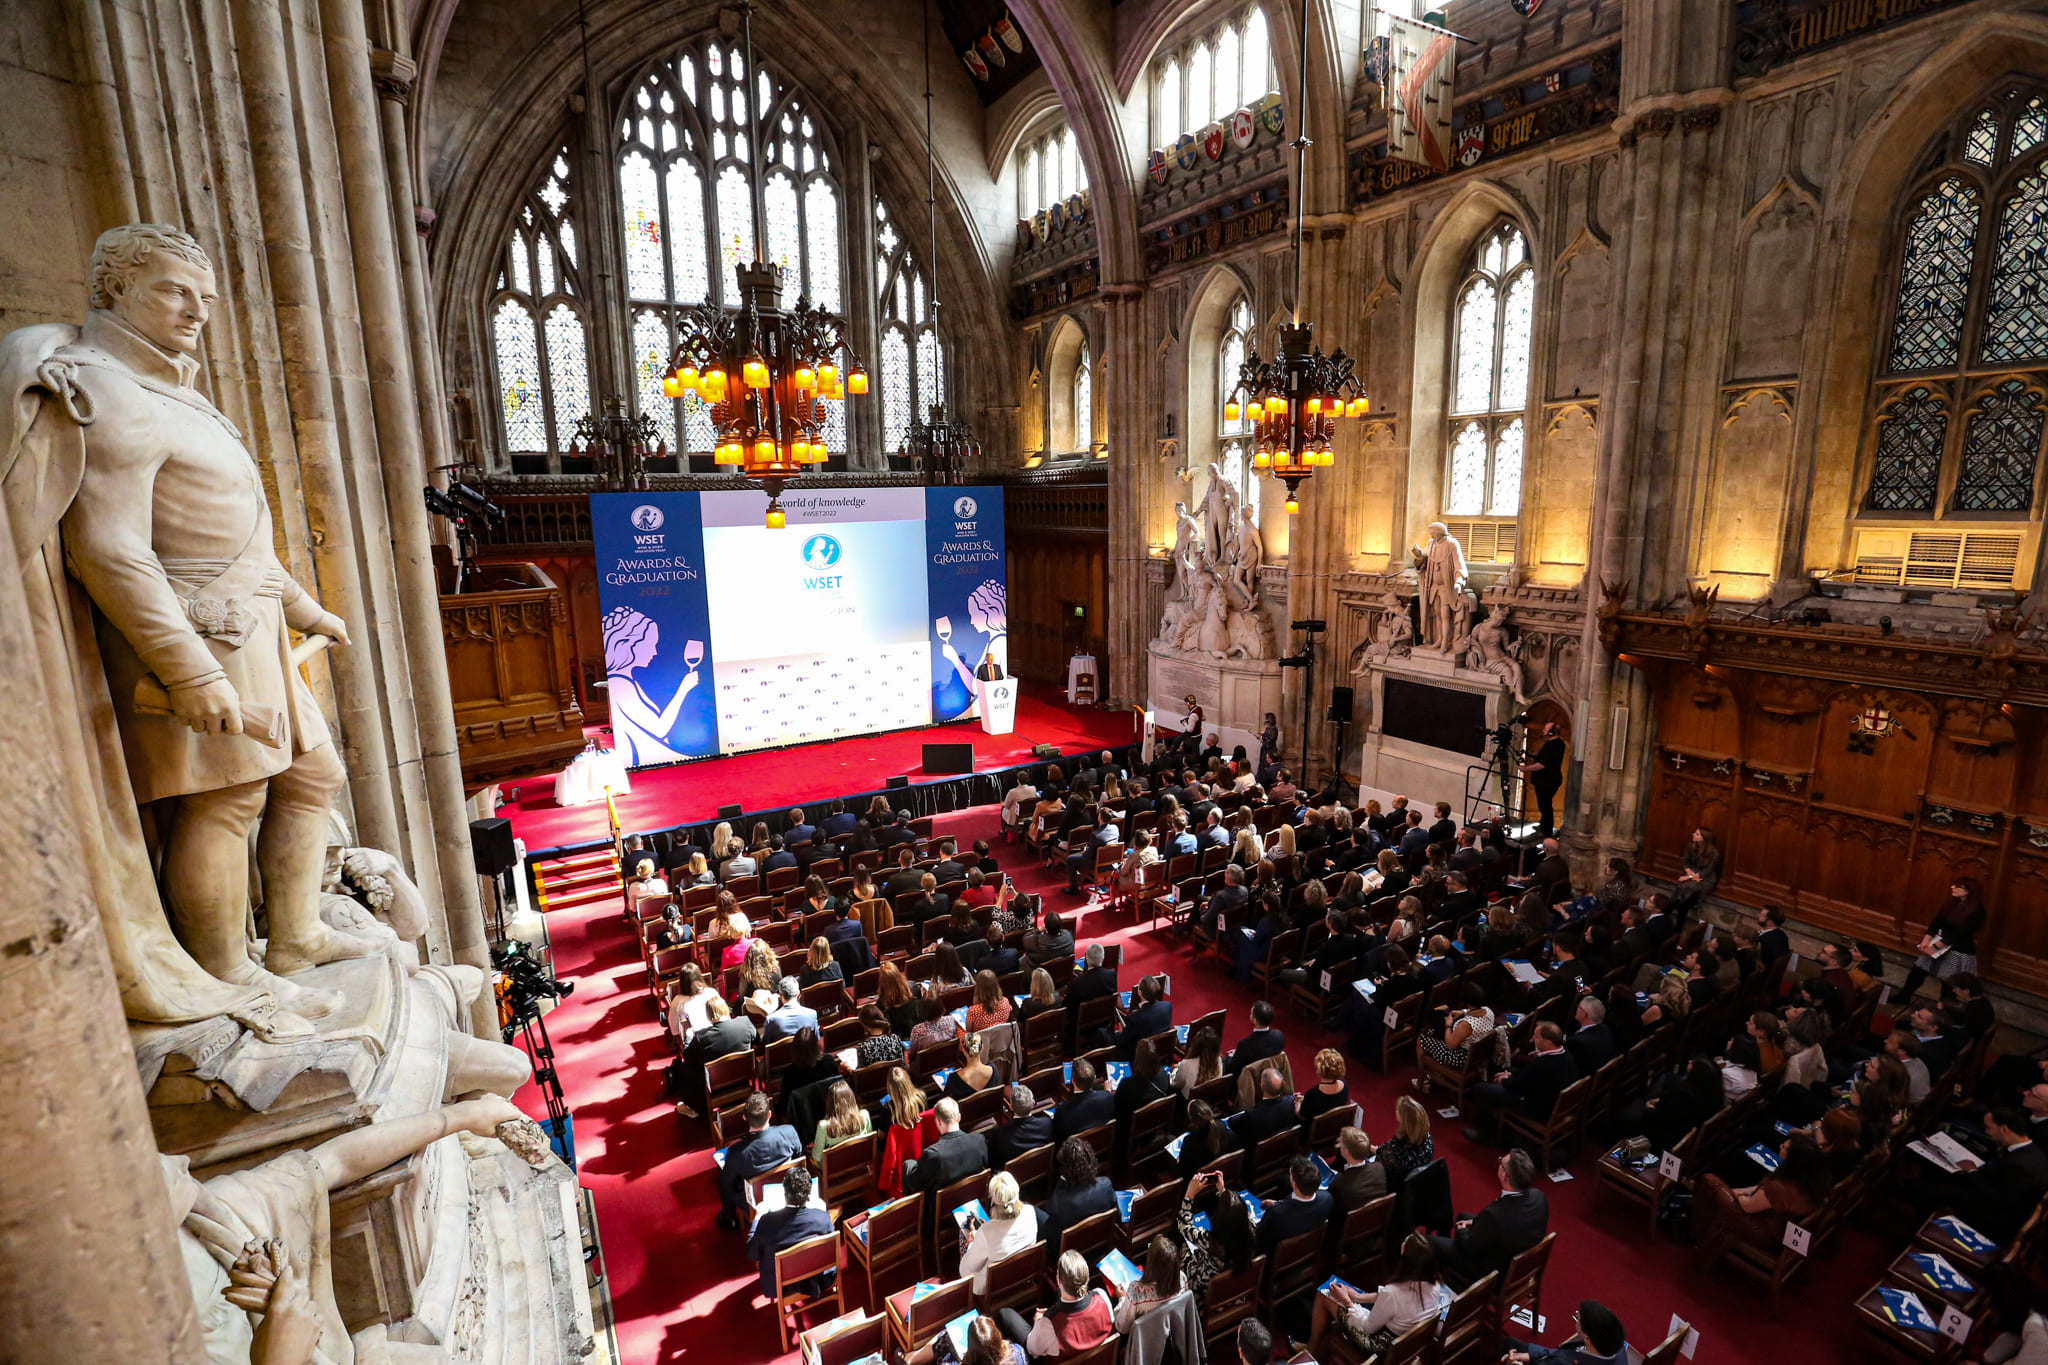 WSET hosts annual awards and graduation ceremony